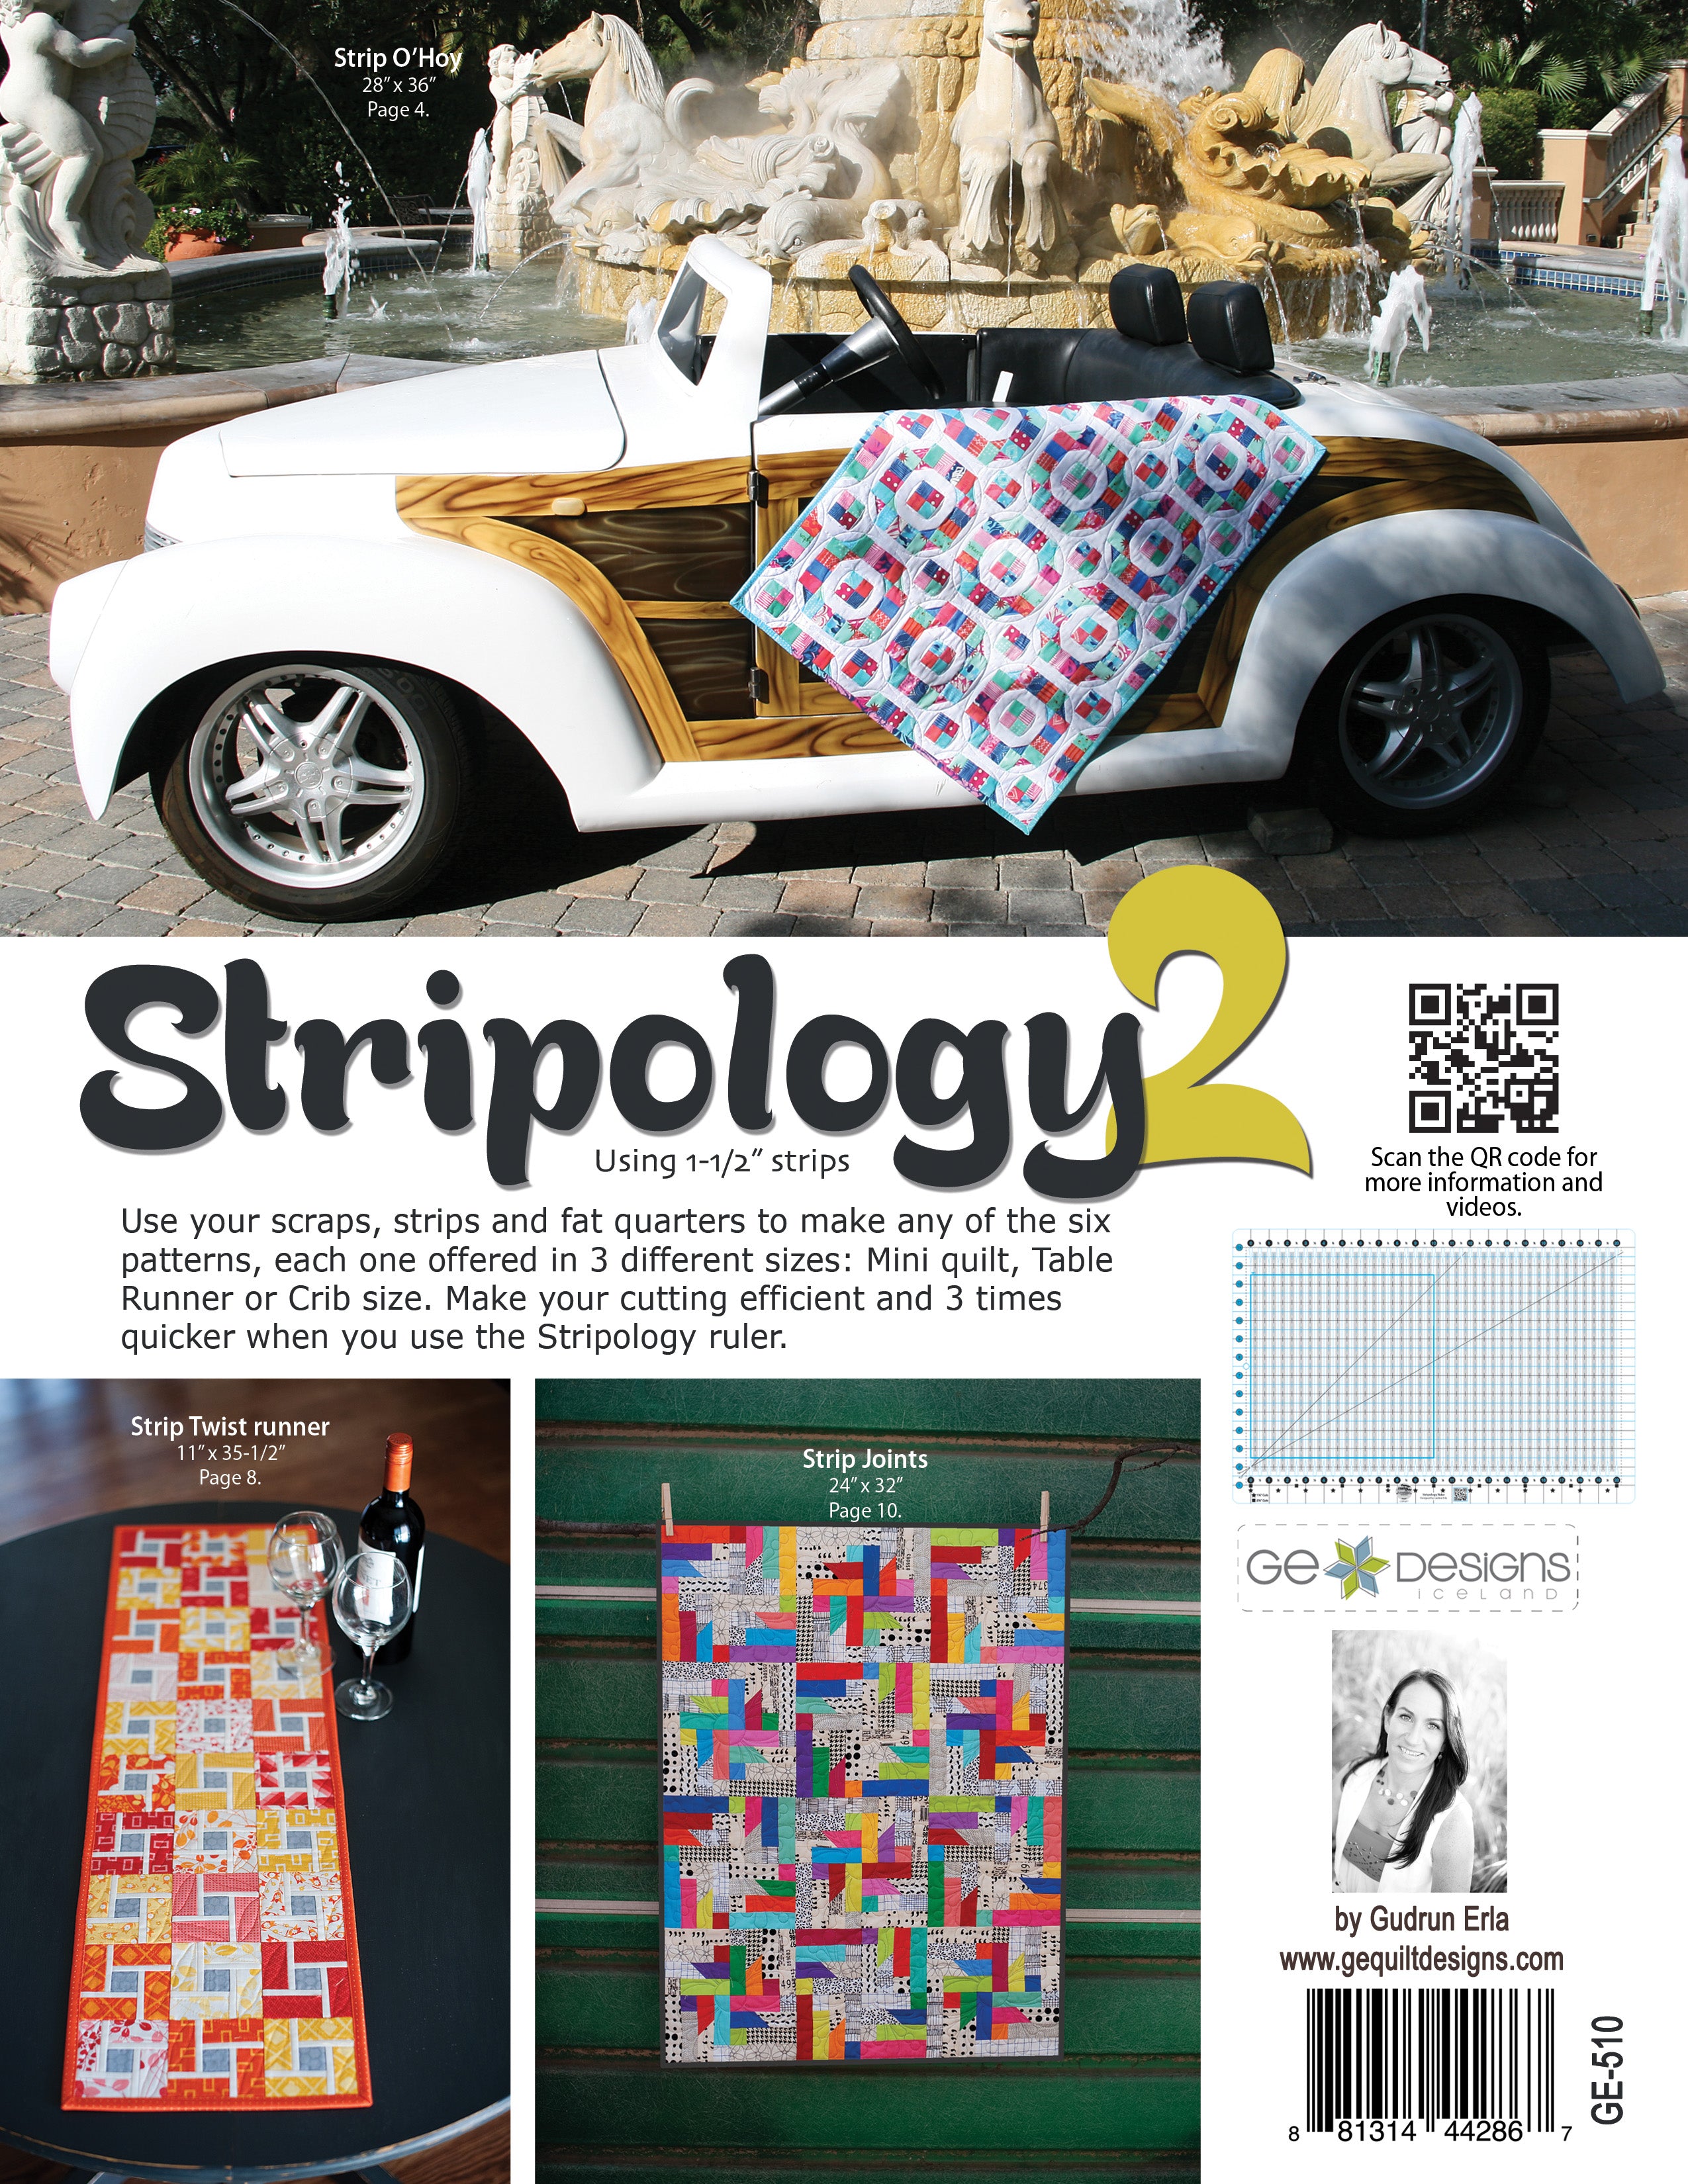 Stripology Mixology 13 Quilts in Multiple Sizes With Stripology Ruler  Includes Cocktail Recipes by Gudrun Erla 